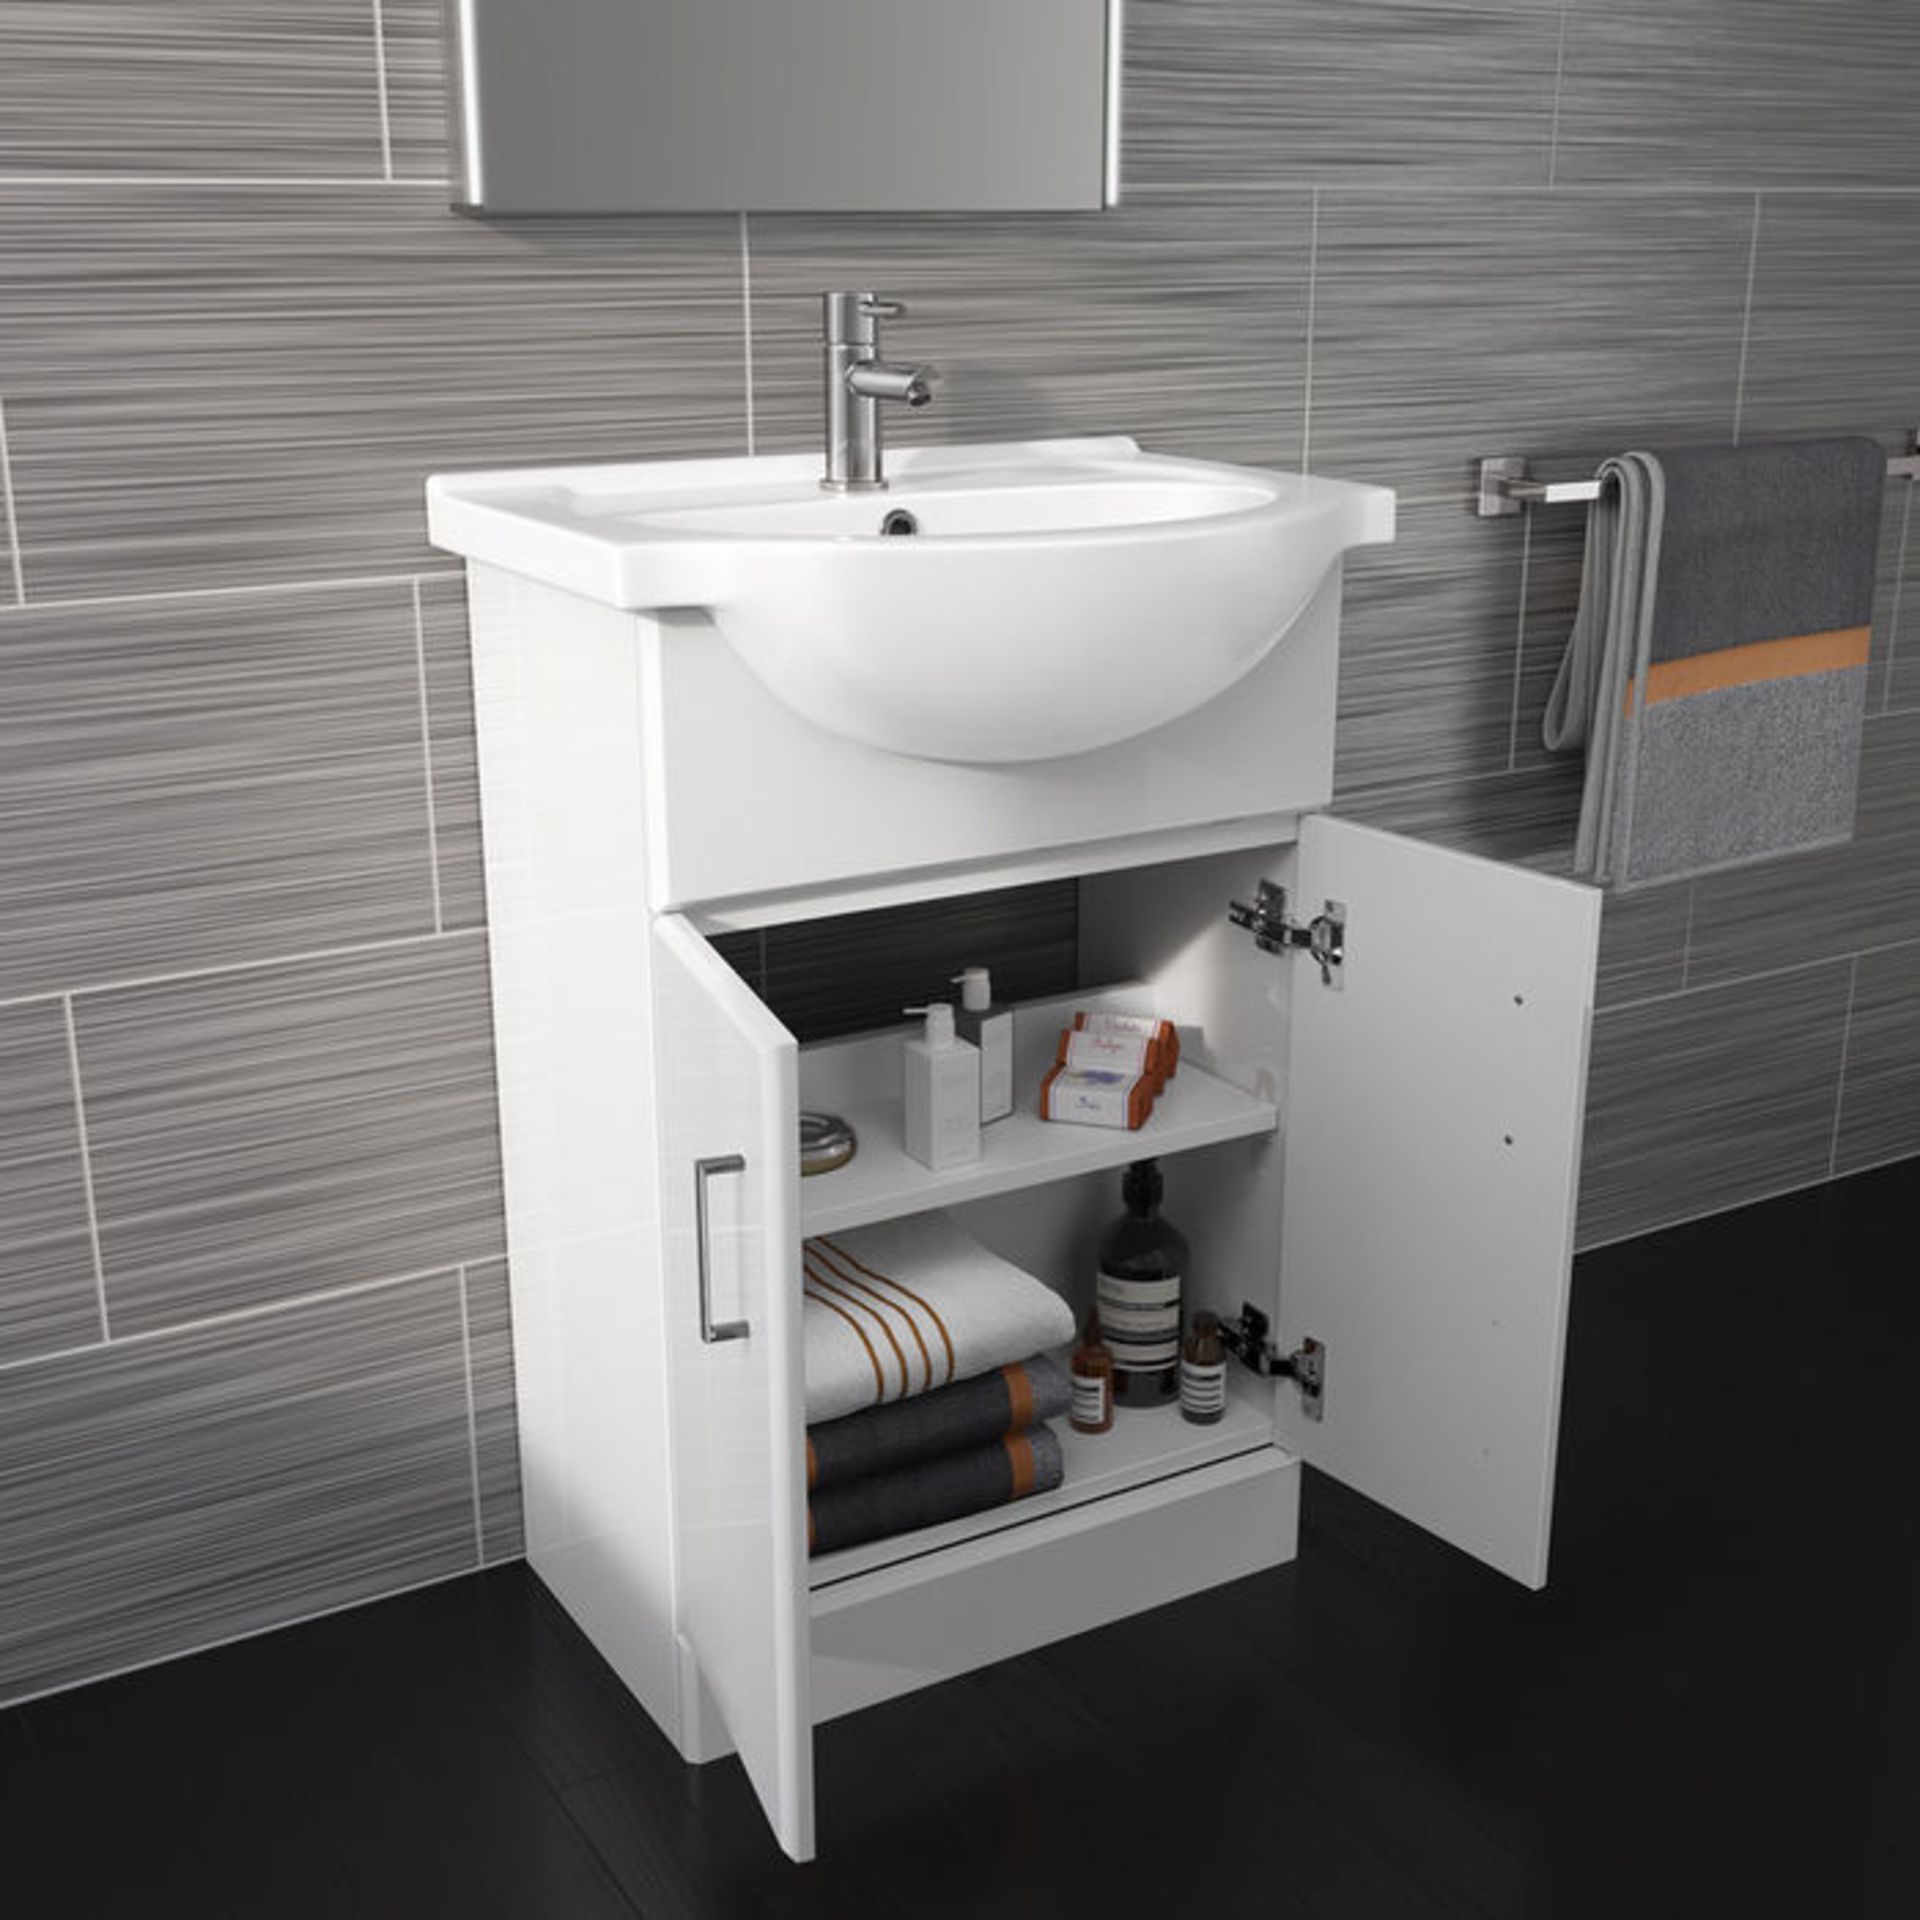 (AL73) 550x300mm Quartz Gloss White Built In Basin Cabinet. RRP £89.99. Comes complete with basin. - Image 2 of 5